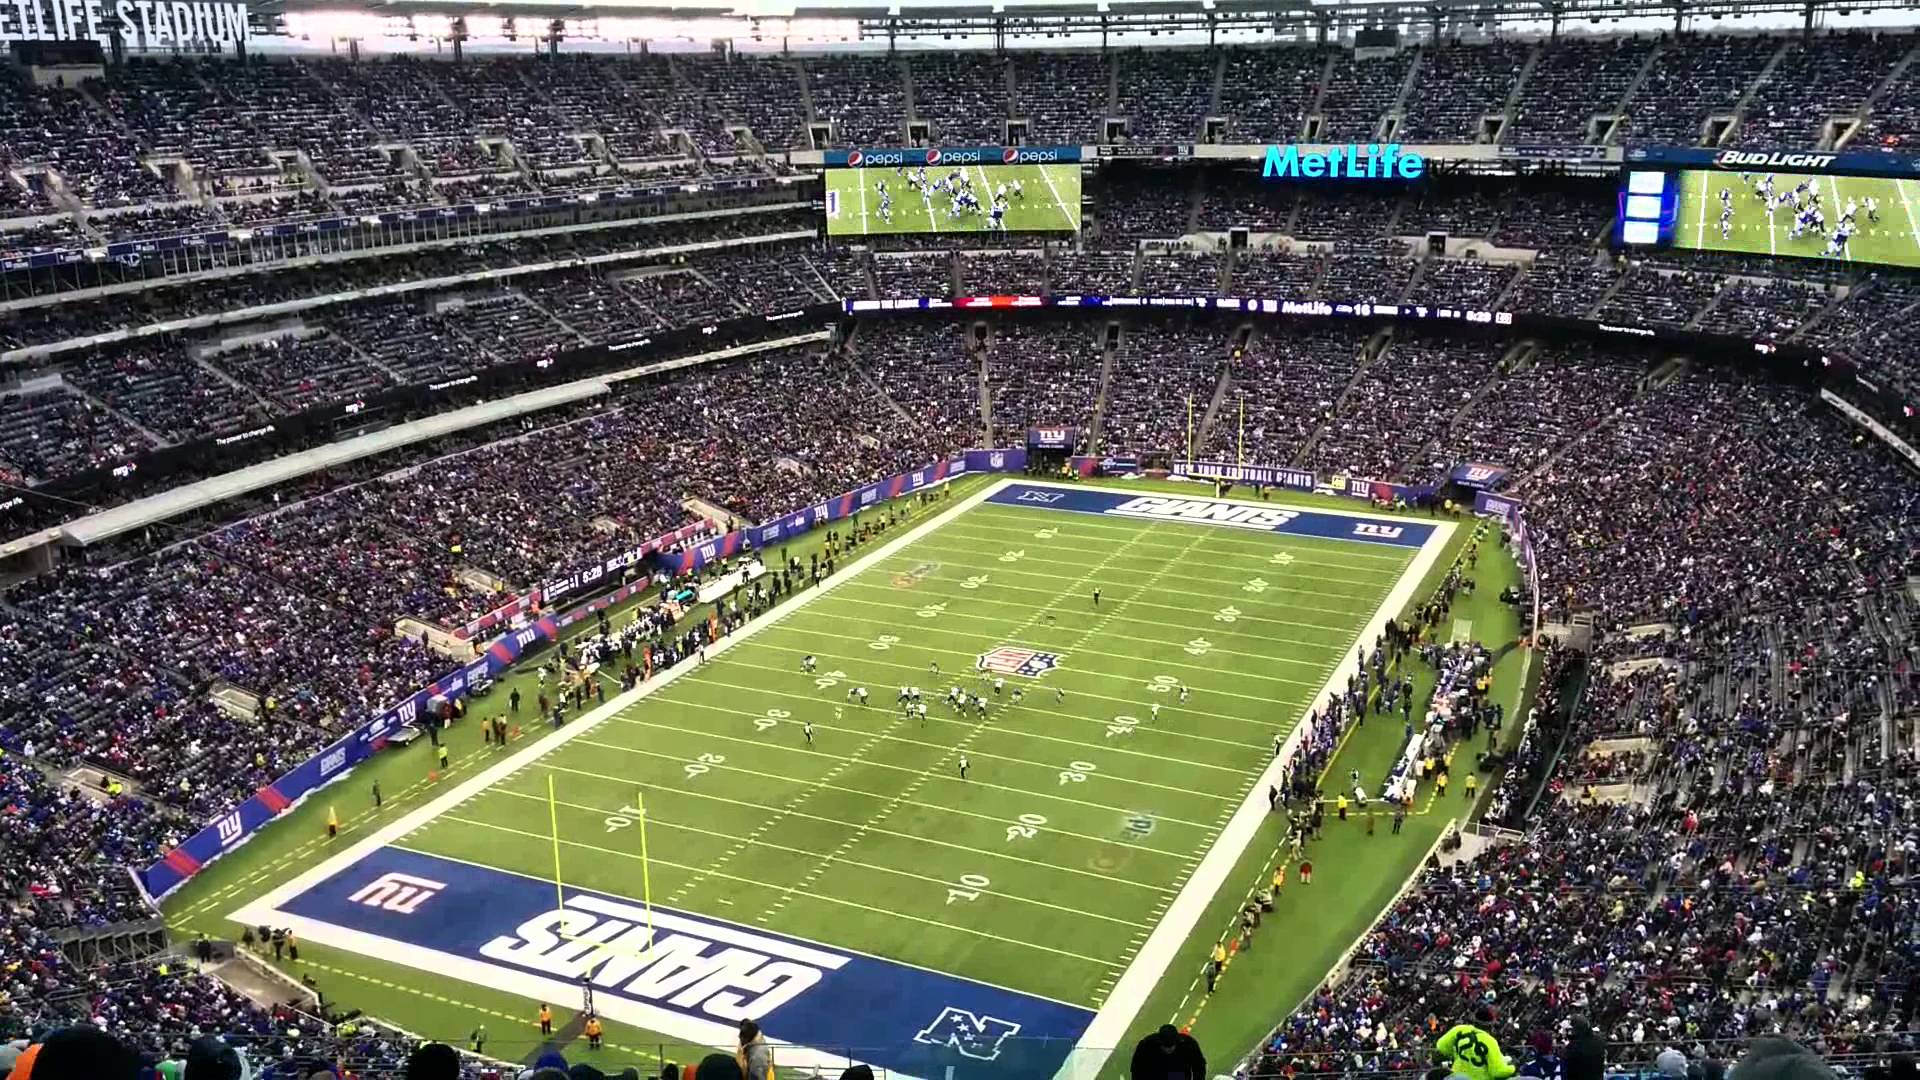 Metlife Stadium Seating Chart, Views and Reviews New York Giants